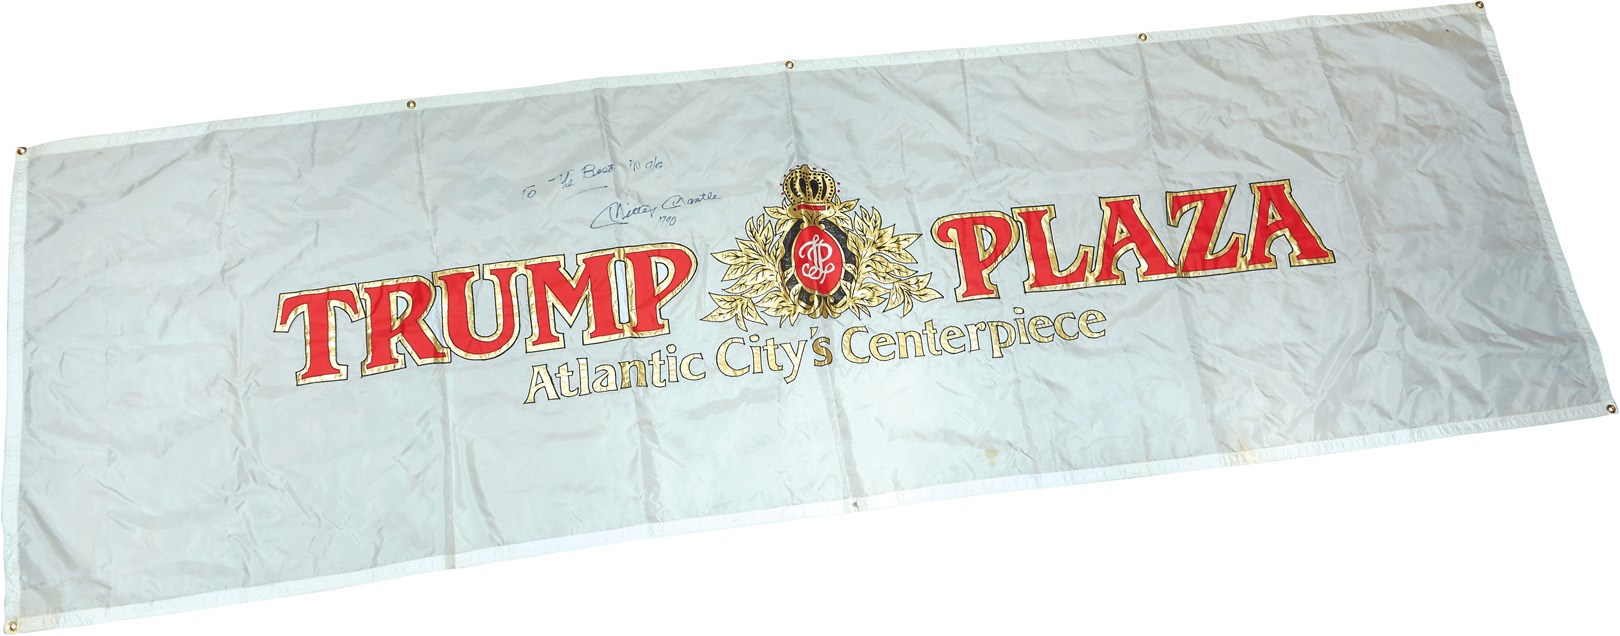 Mantle and Maris - 1990 Mickey Mantle Signed Trump Plaza Banner